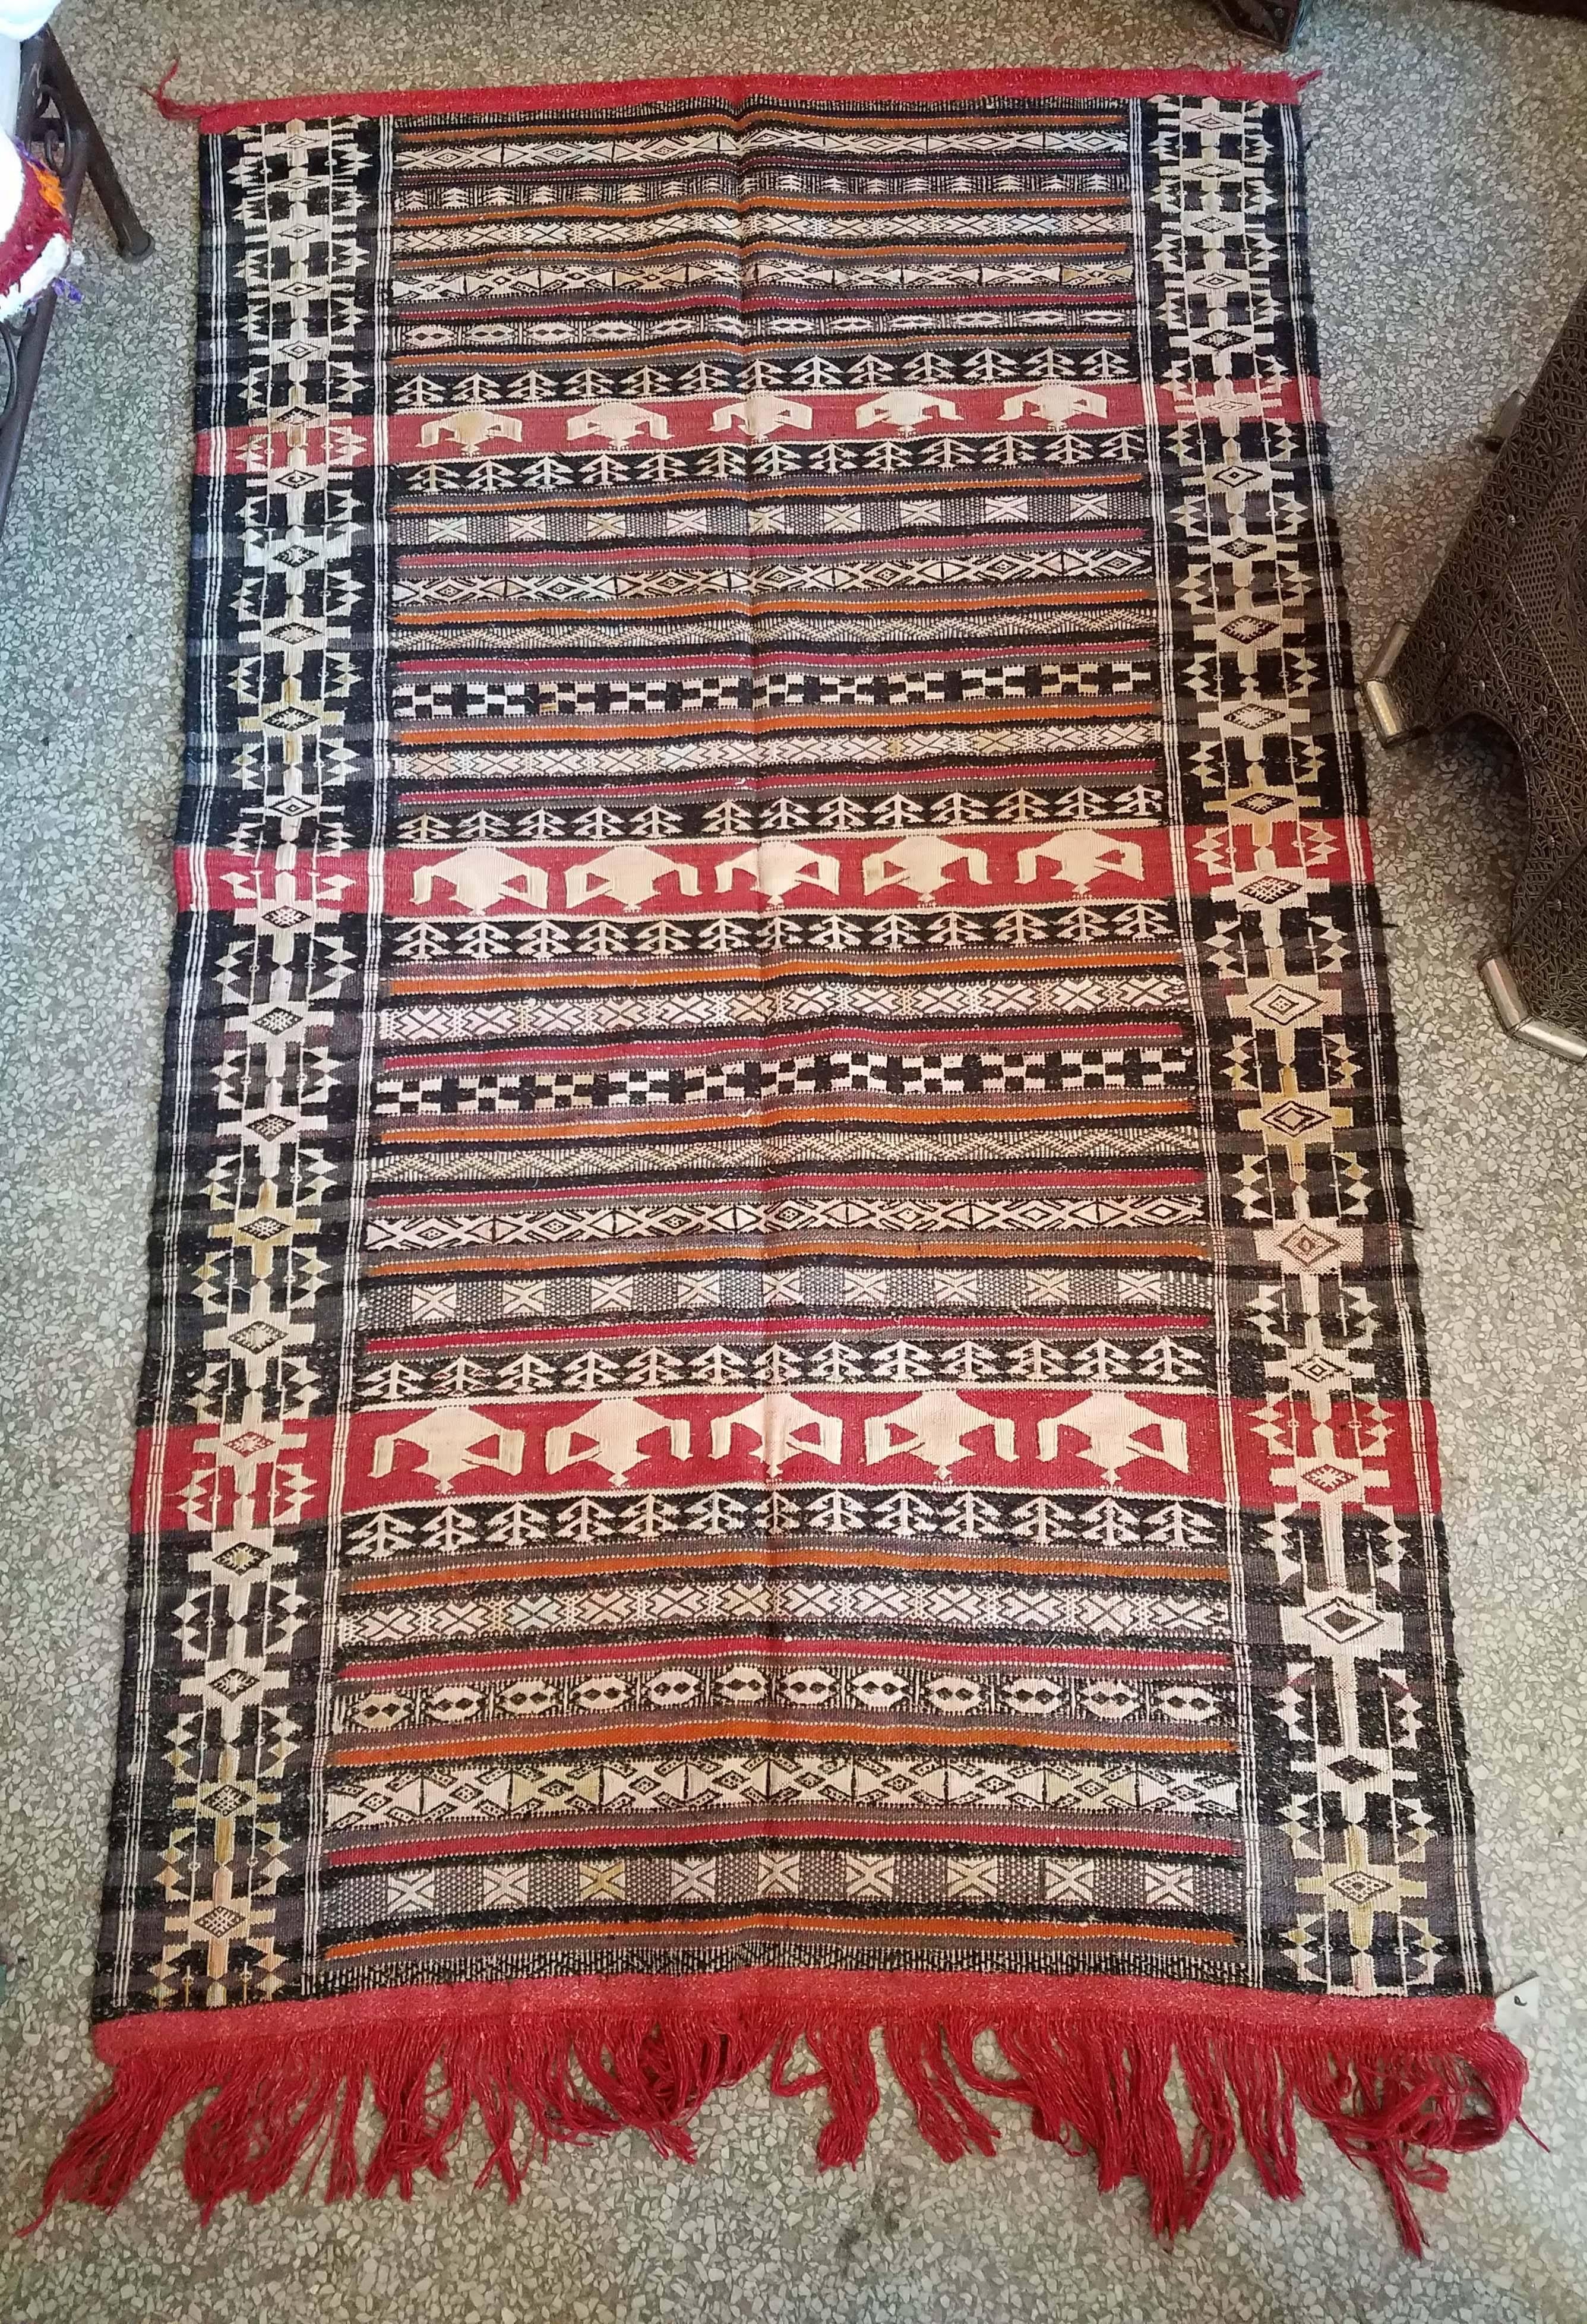 Multi-color Moroccan Berber runner rug. Excellent handcraftsmanship. Priced to sell. Measuring approximately 70 inches long and 40 inches wide, this amazing rug comes from the Atlas mountains of Morocco. It would be a great addition to your home or